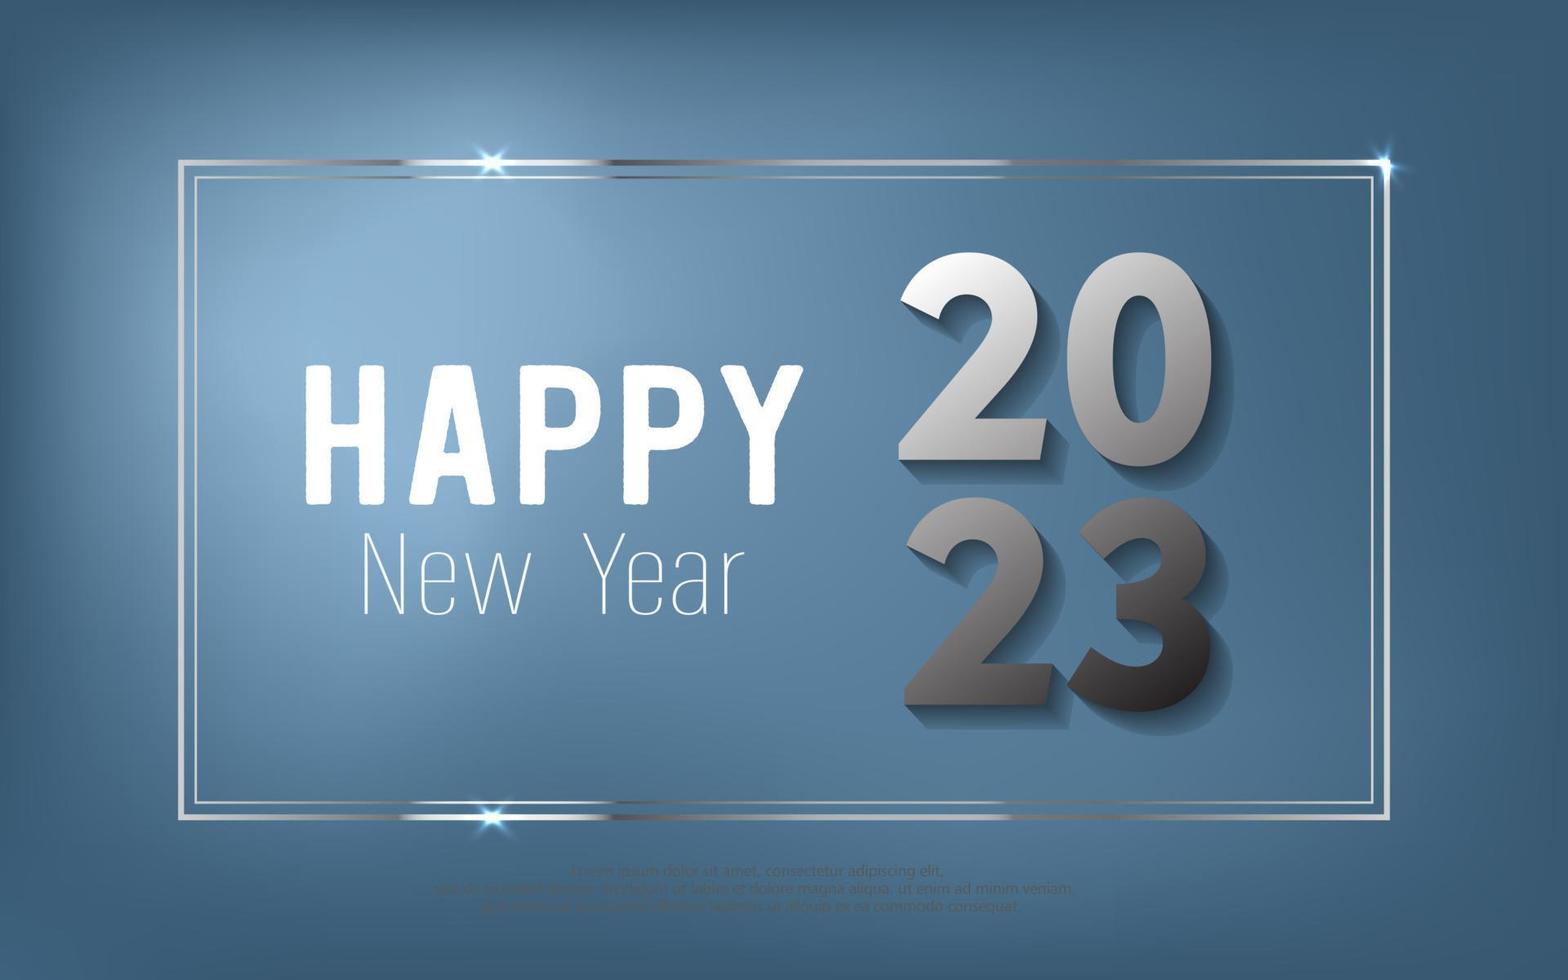 Happy New Year 2023. metal number, text with square frame on blue gradient background. vector